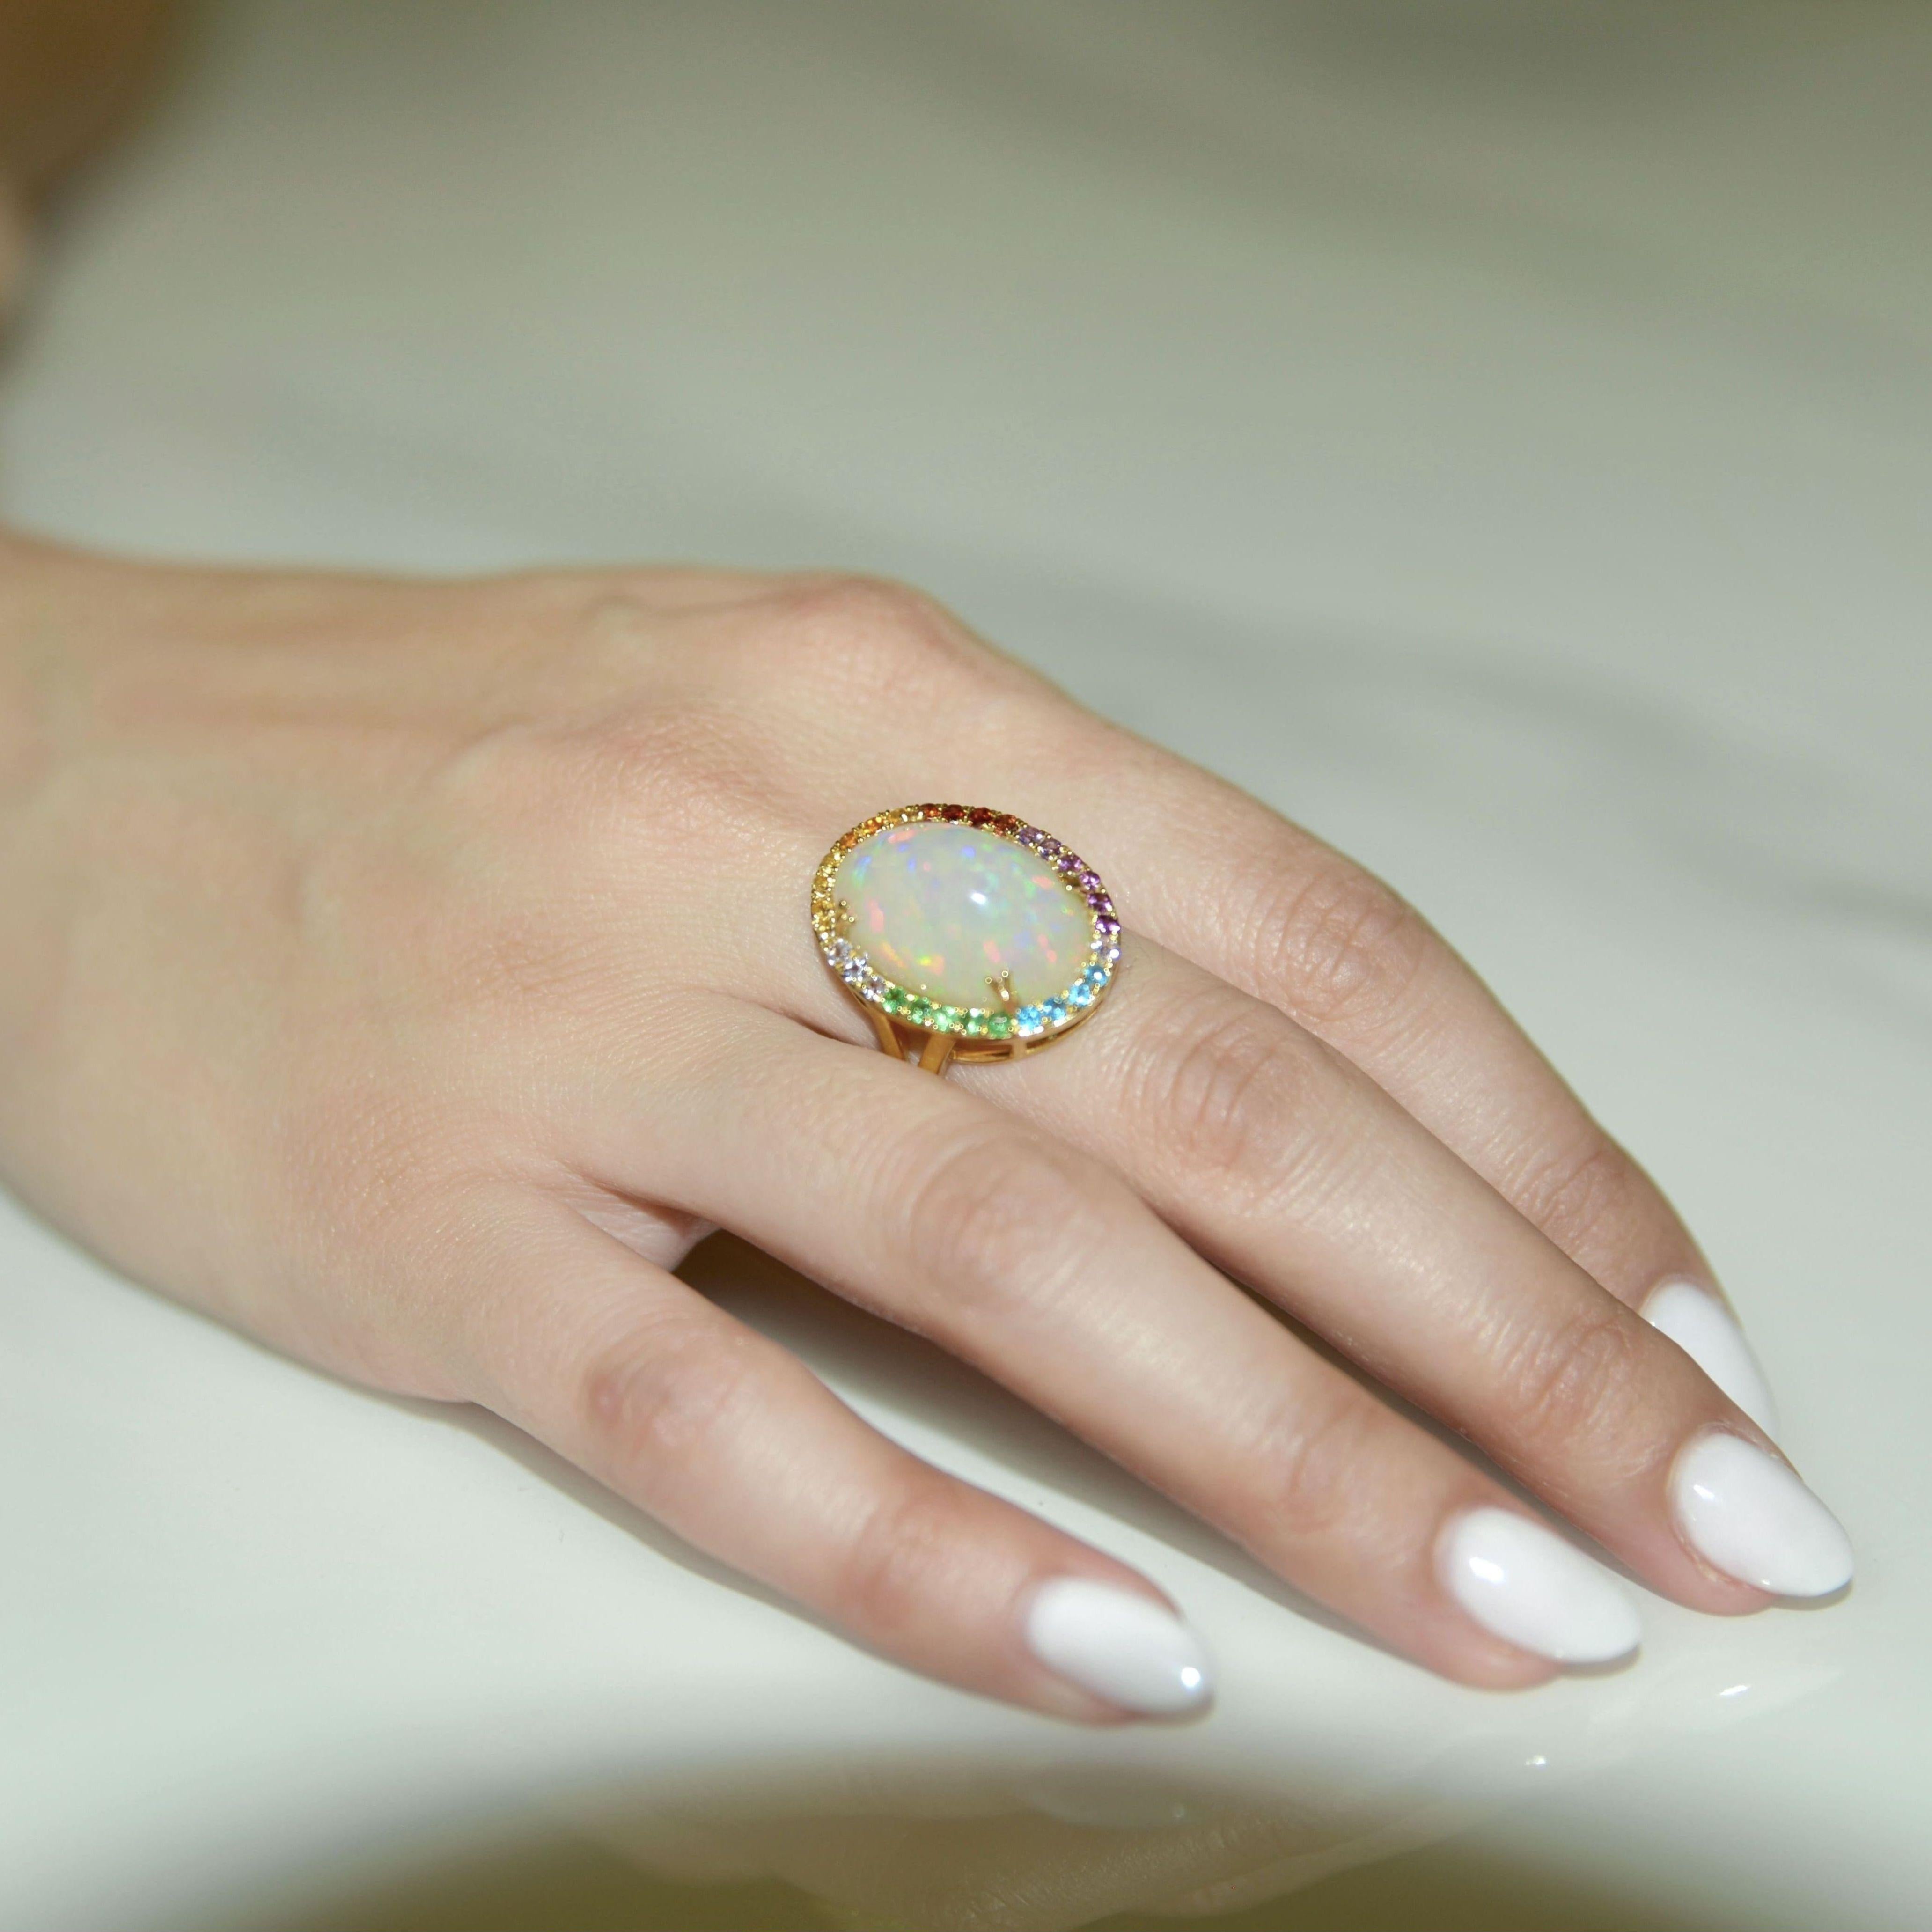 This 14K Yellow Gold Opal Ring the epitome of elegant jewelry. Opal jewelry is often admired by its flash of color and this opal ring does not disappoint with its play of color. Decorated with the different gemstones representing the different